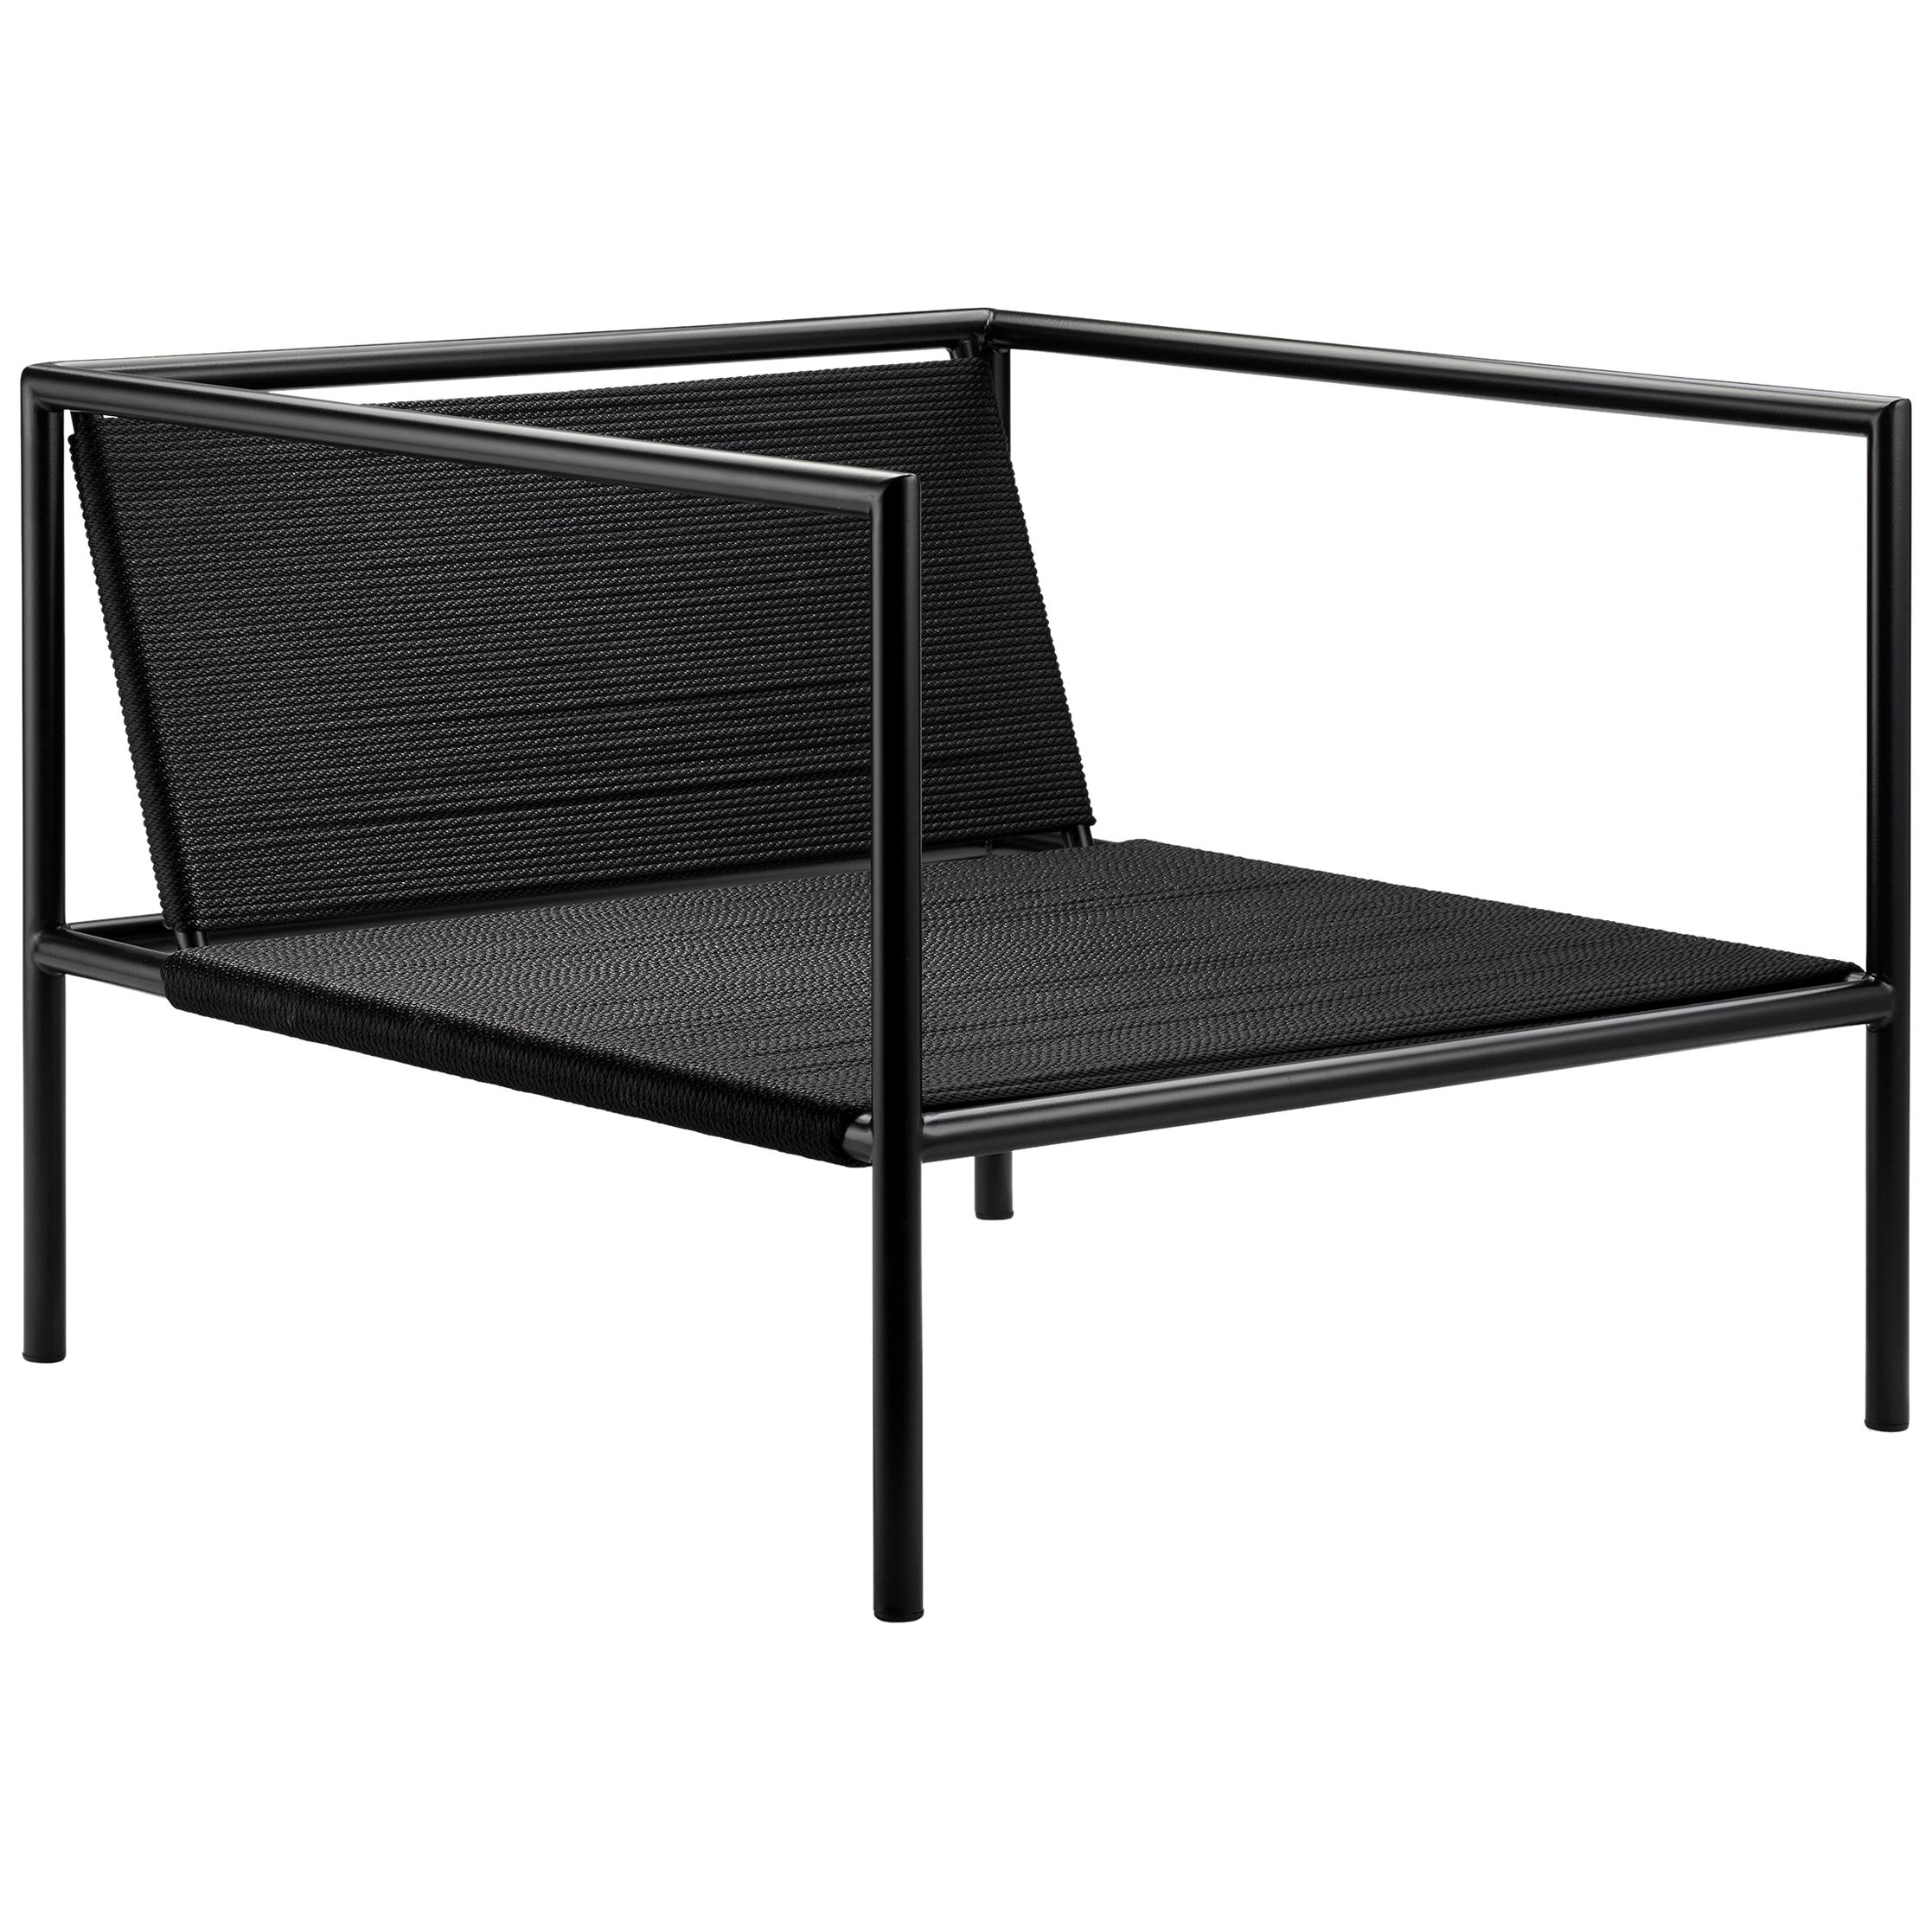 Outdoor Armchair Powder Coated Black Stainless Steel and Nylon Cord For Sale